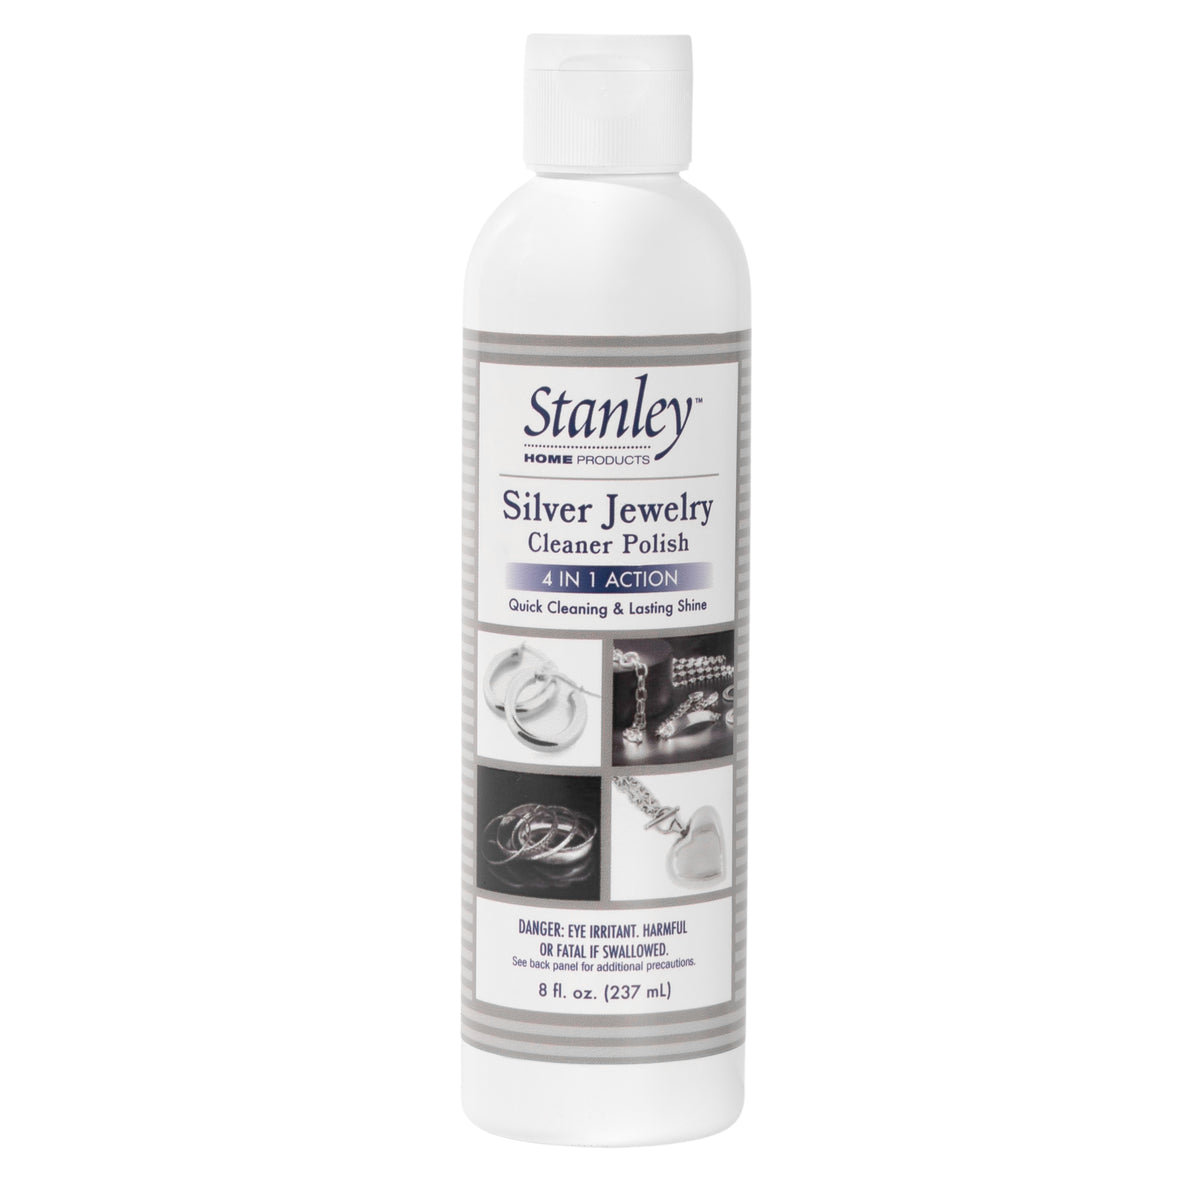 Stanley Silver Jewelry Cleaner Polish